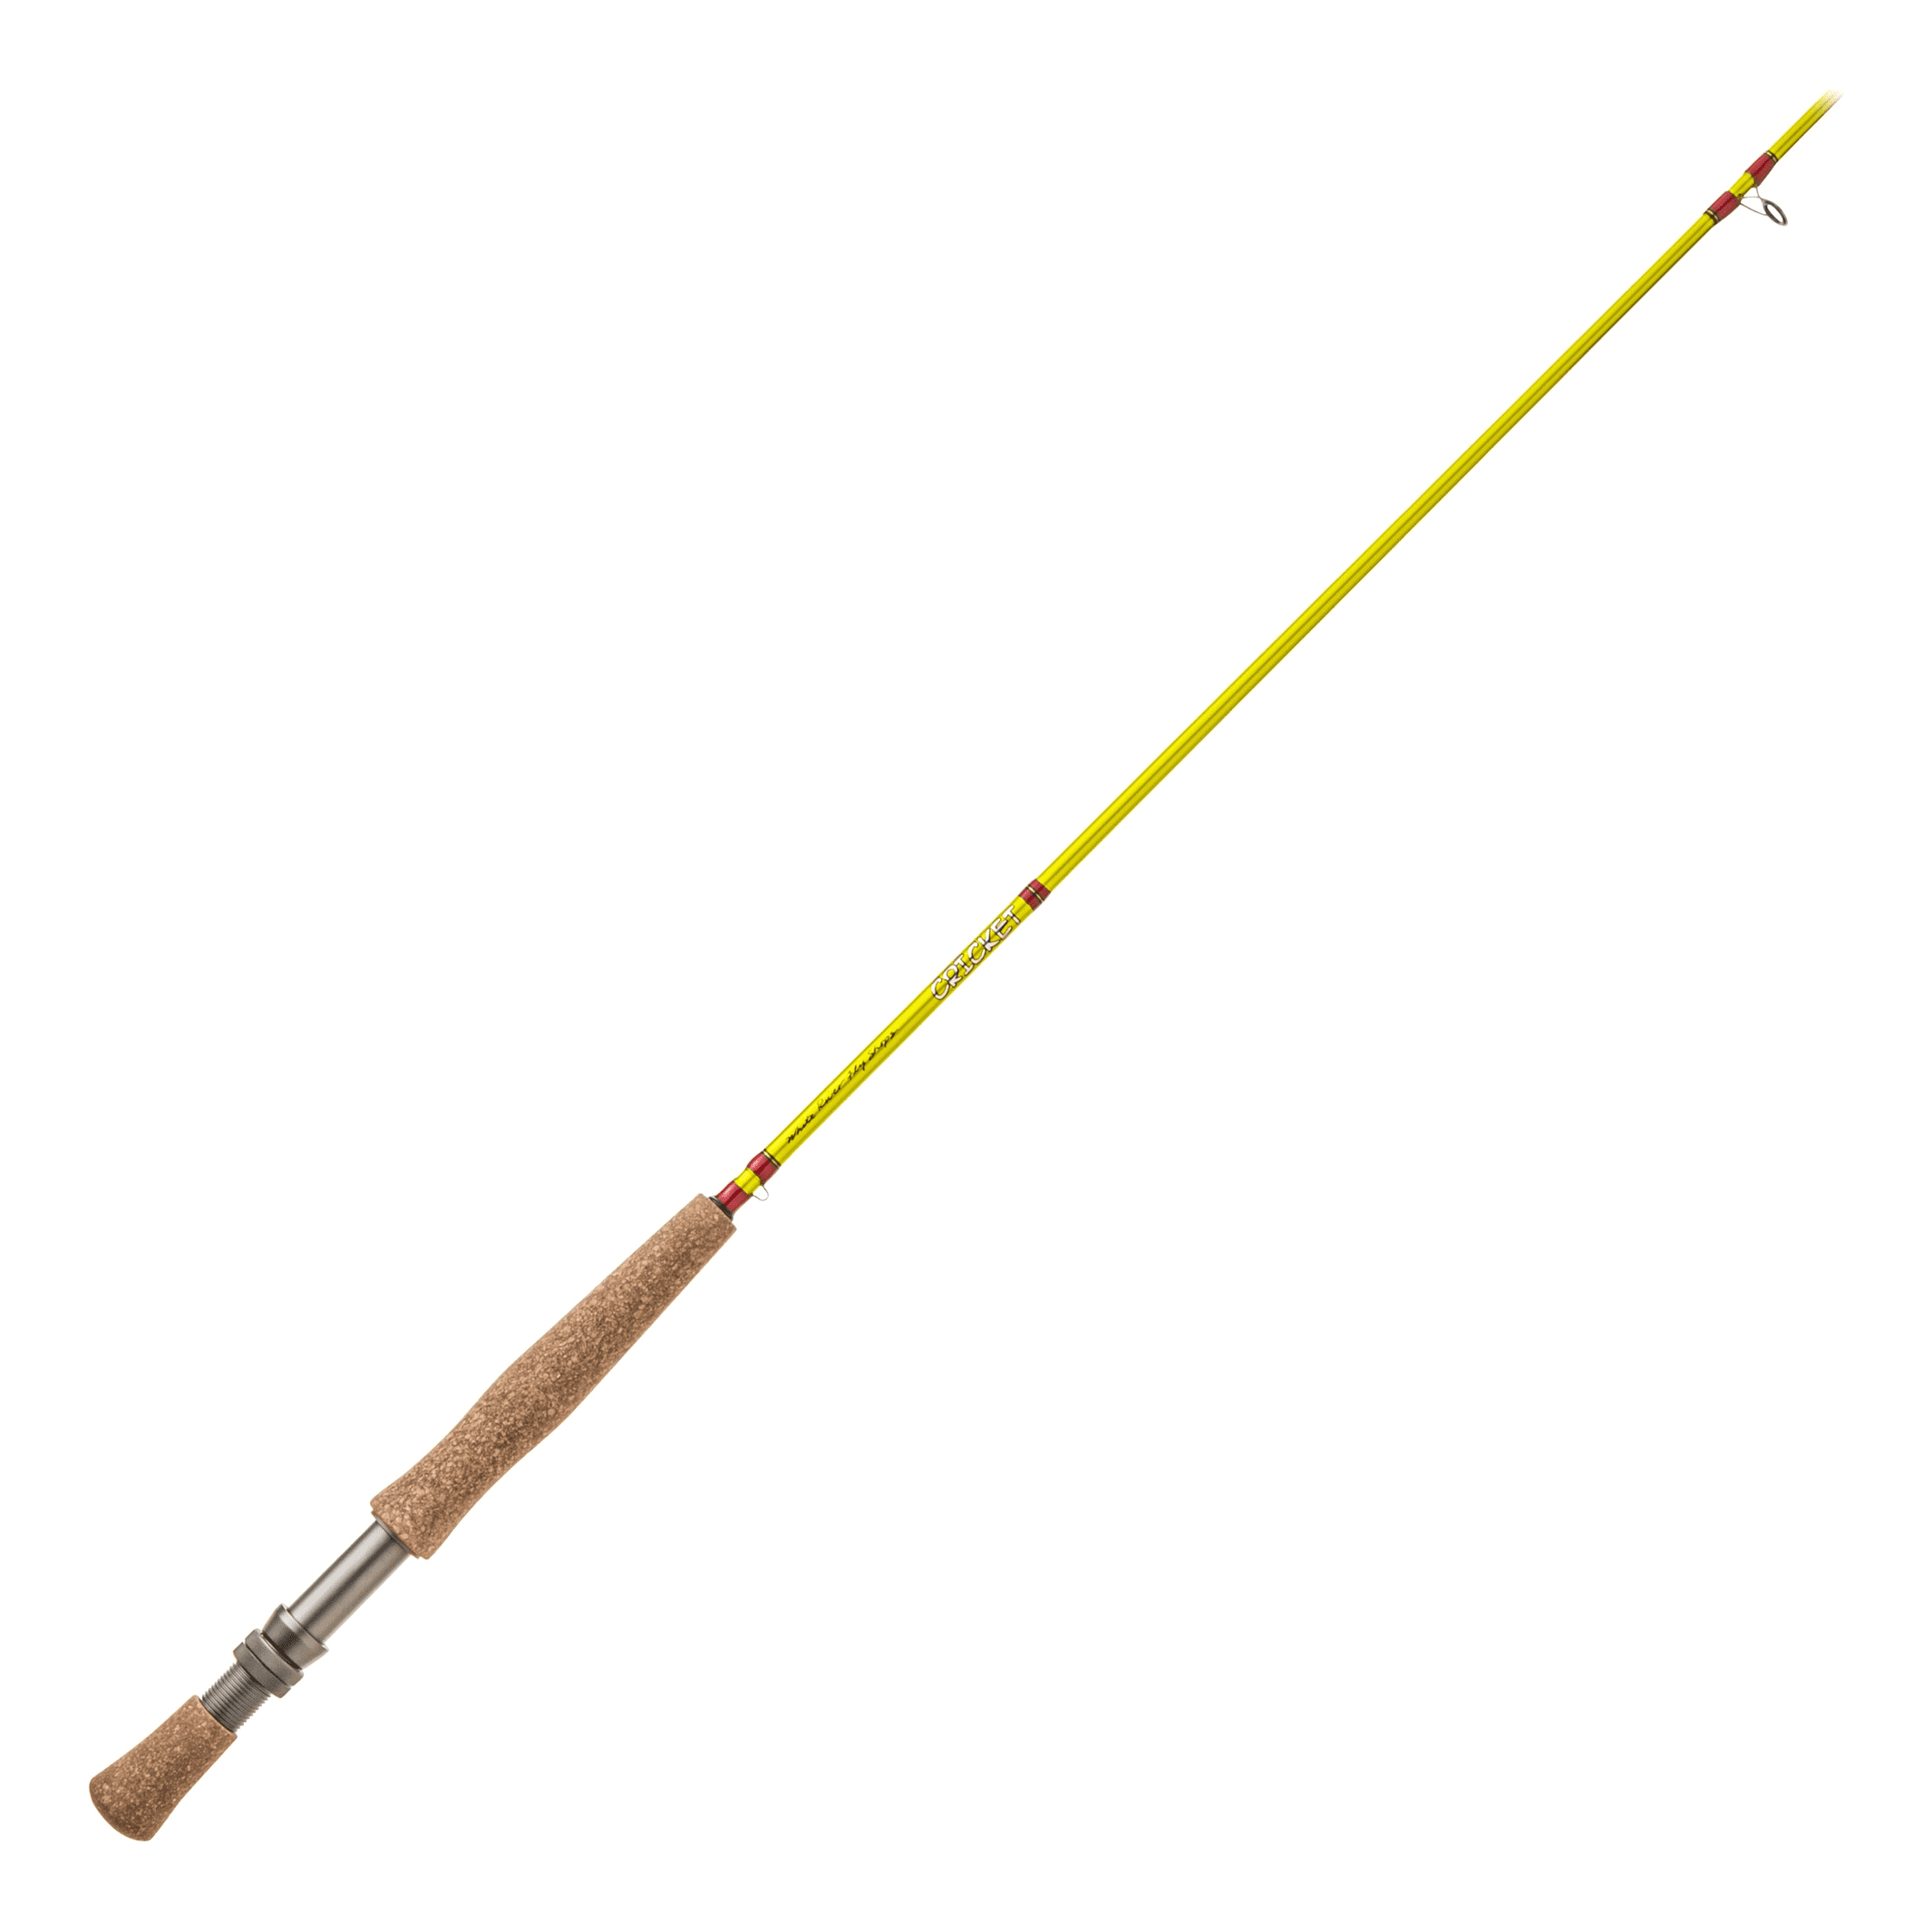 Fenwick Announces Eagle XP Fly Combo and HMG Fly Rod – The Venturing Angler